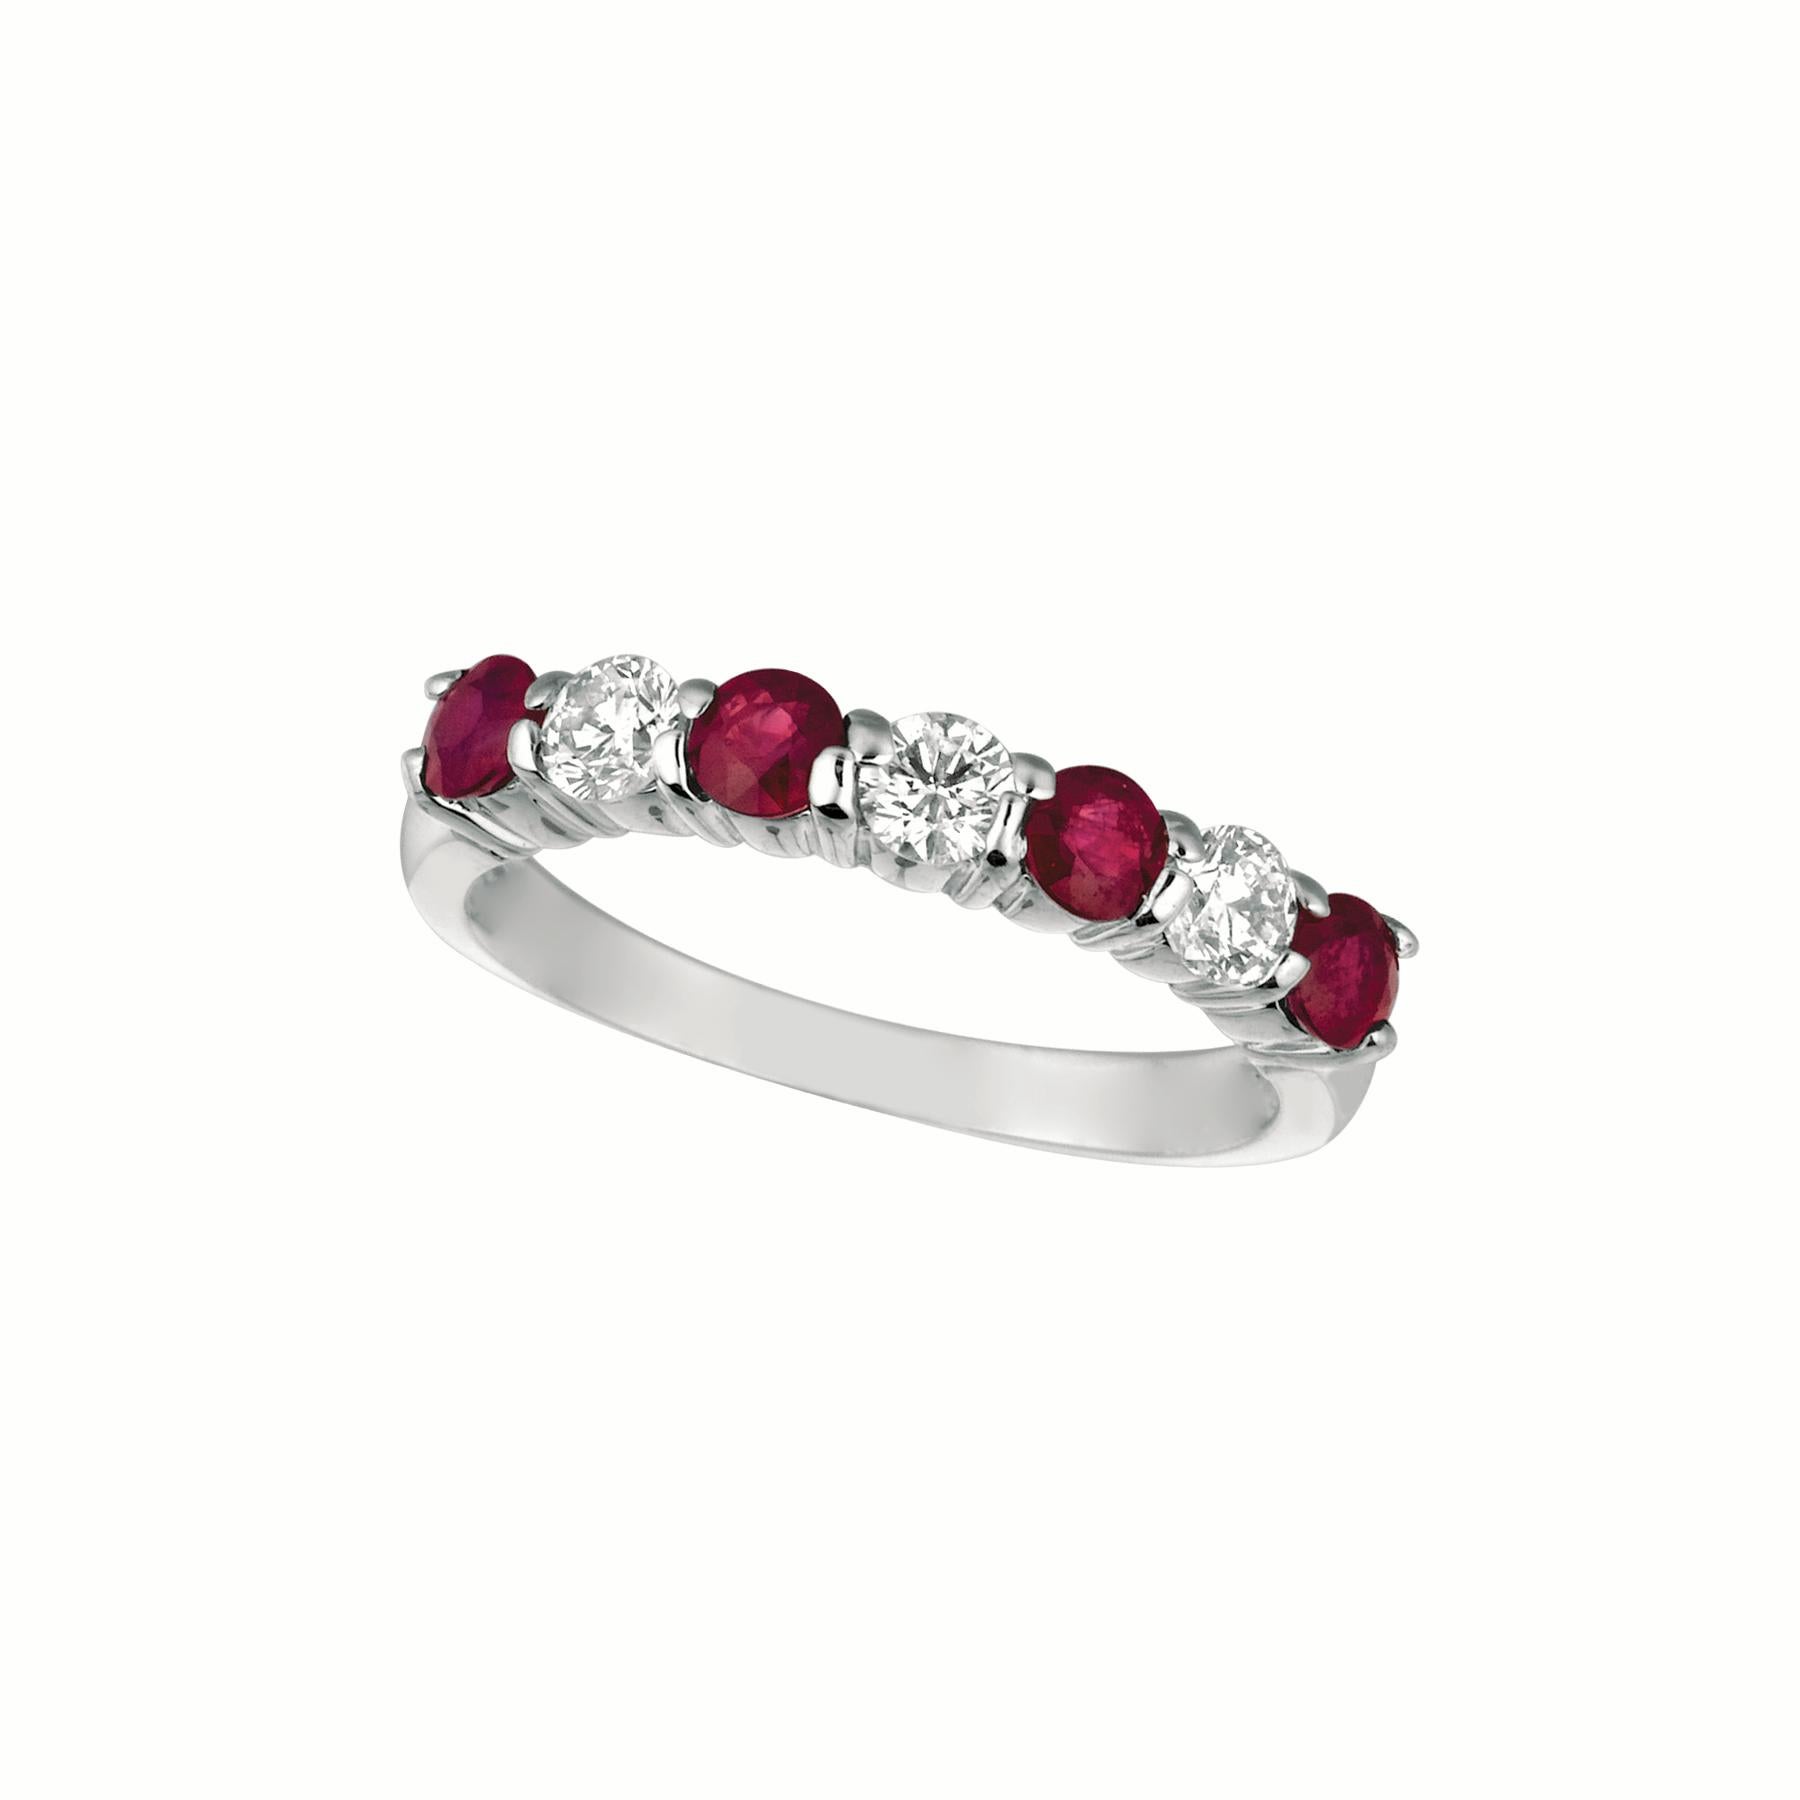 1.65 Carat Natural Diamond and Ruby Round Cut 7 Stone Ring Band G SI 14K White Gold

100% Natural Diamonds and Rubies
1.65CTW
G-H
SI
14K White Gold Prong style, 2.60 grams
3 mm in width
Size 7
3 diamonds - 0.45ct, 4 rubies -1.20ct

R6415WDR1

ALL